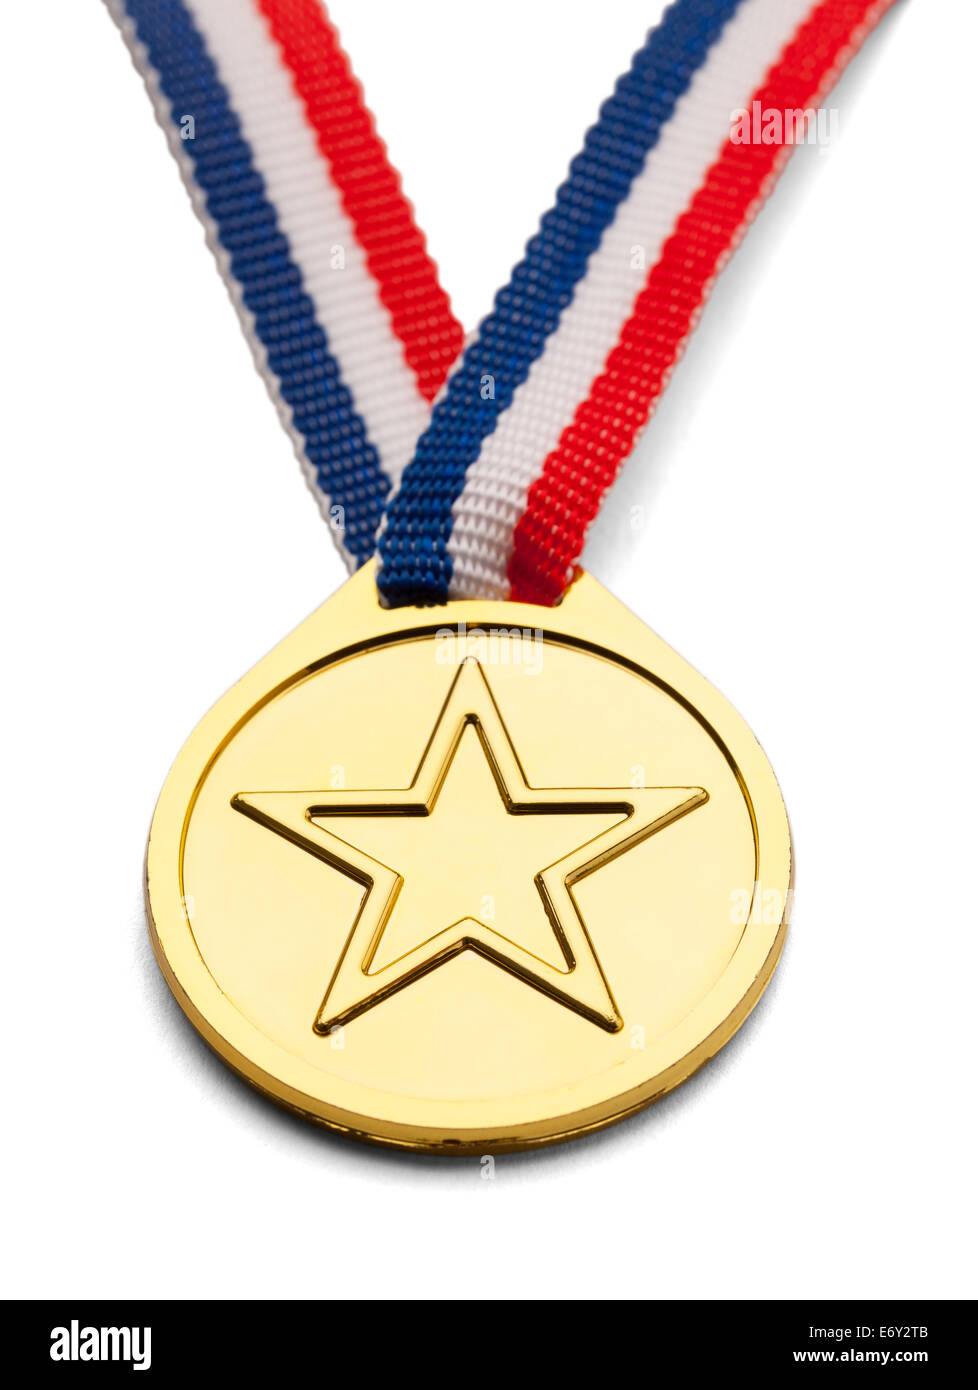 Gold medal with star and ribbon isolated on white background. Stock Photo